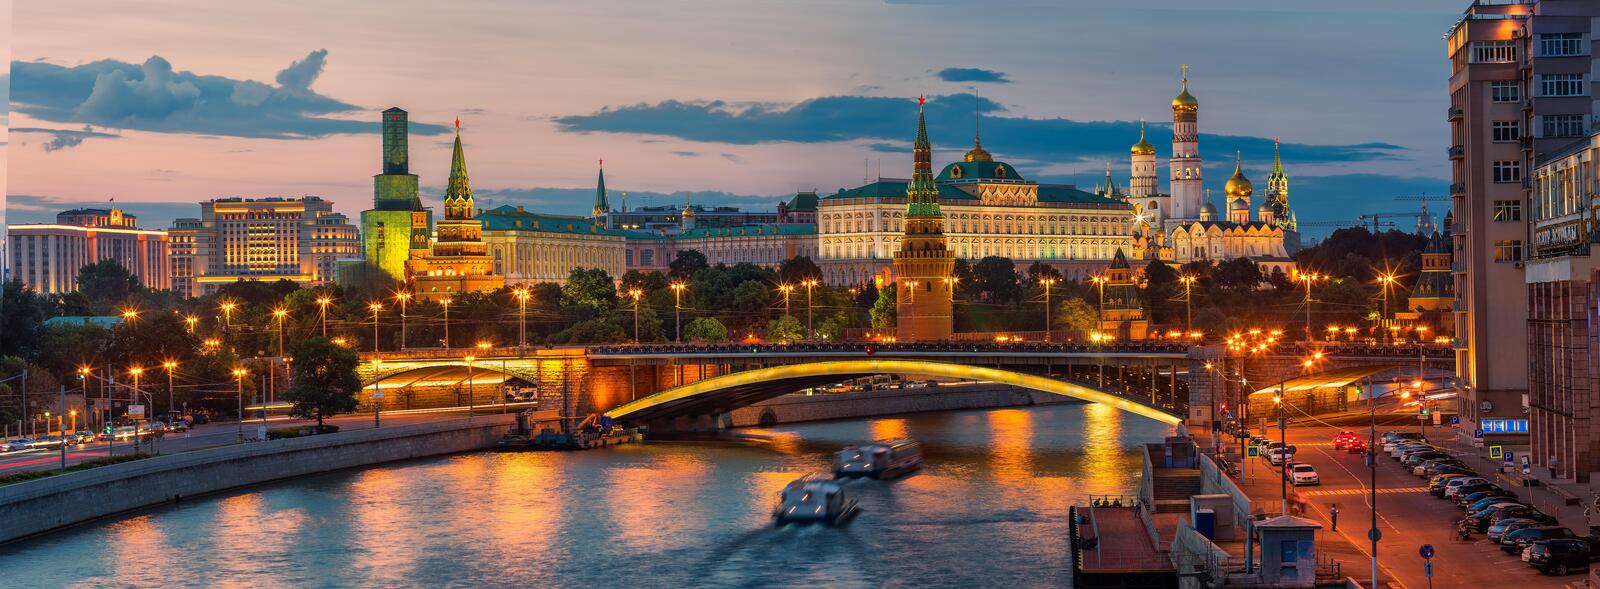 Wallpapers panorama Russia Moscow Kremlin on the desktop